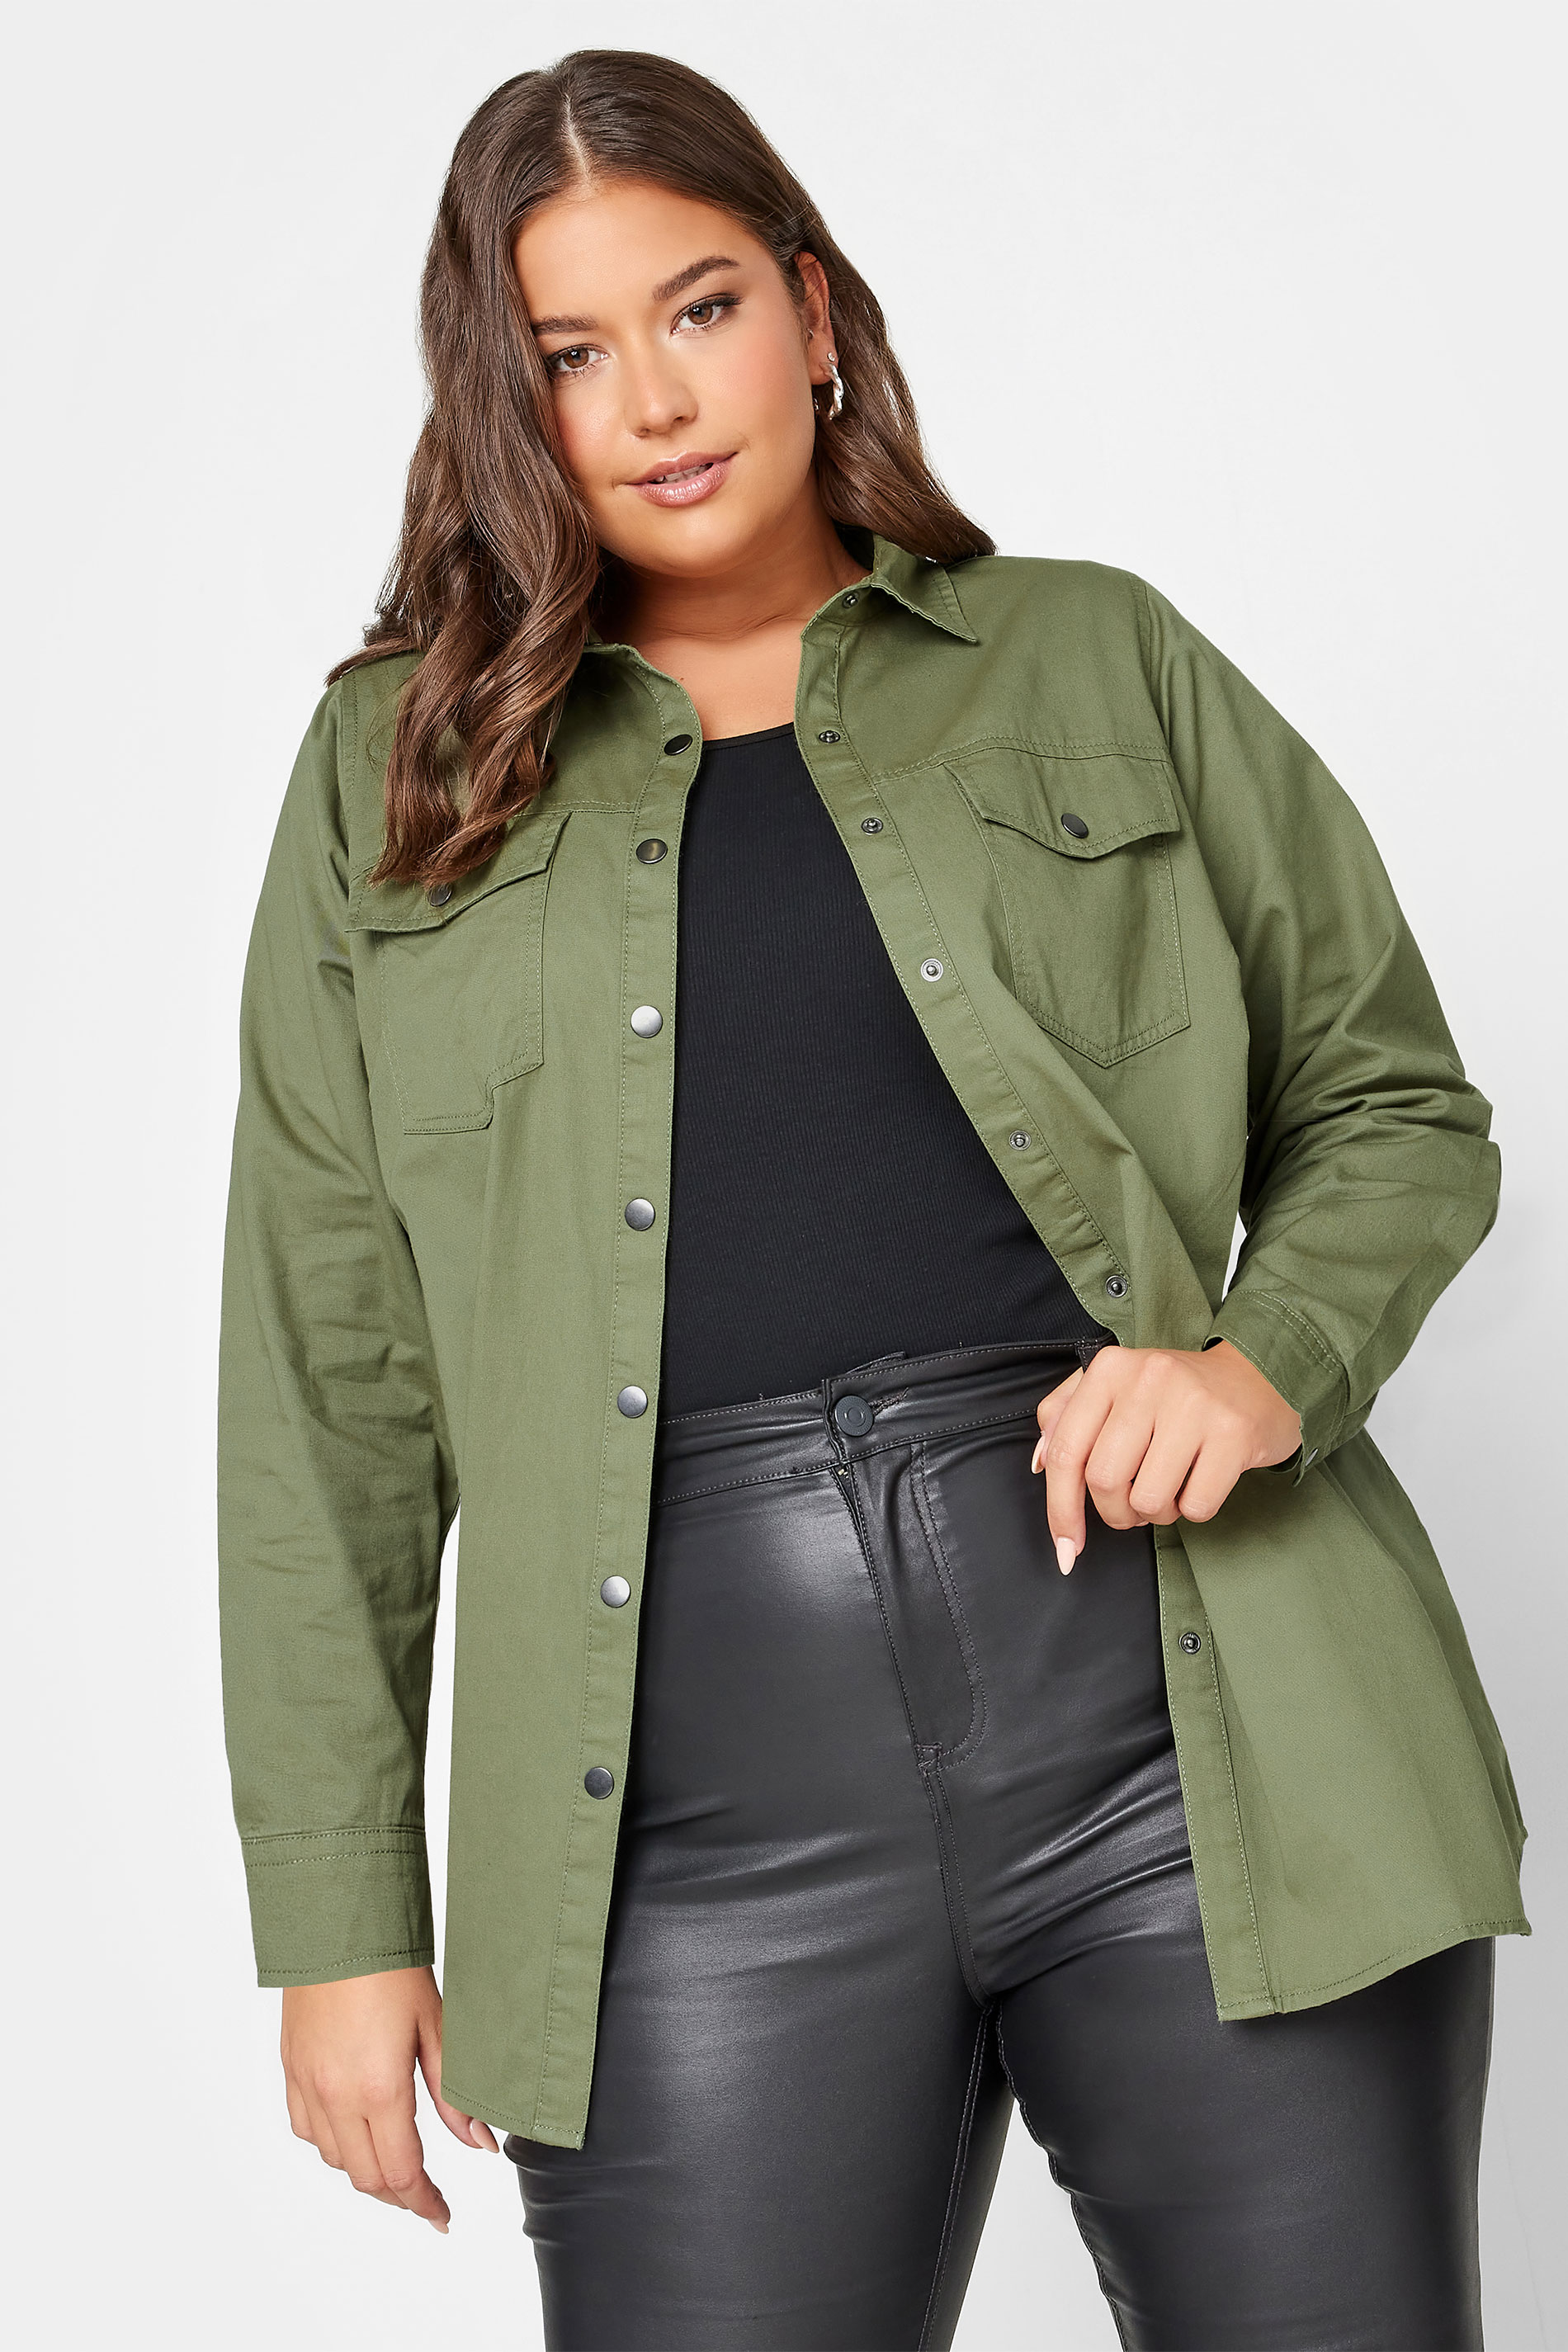 Yours Curve Khaki Green Utility Shacket, Women's Curve & Plus Size, Yours product